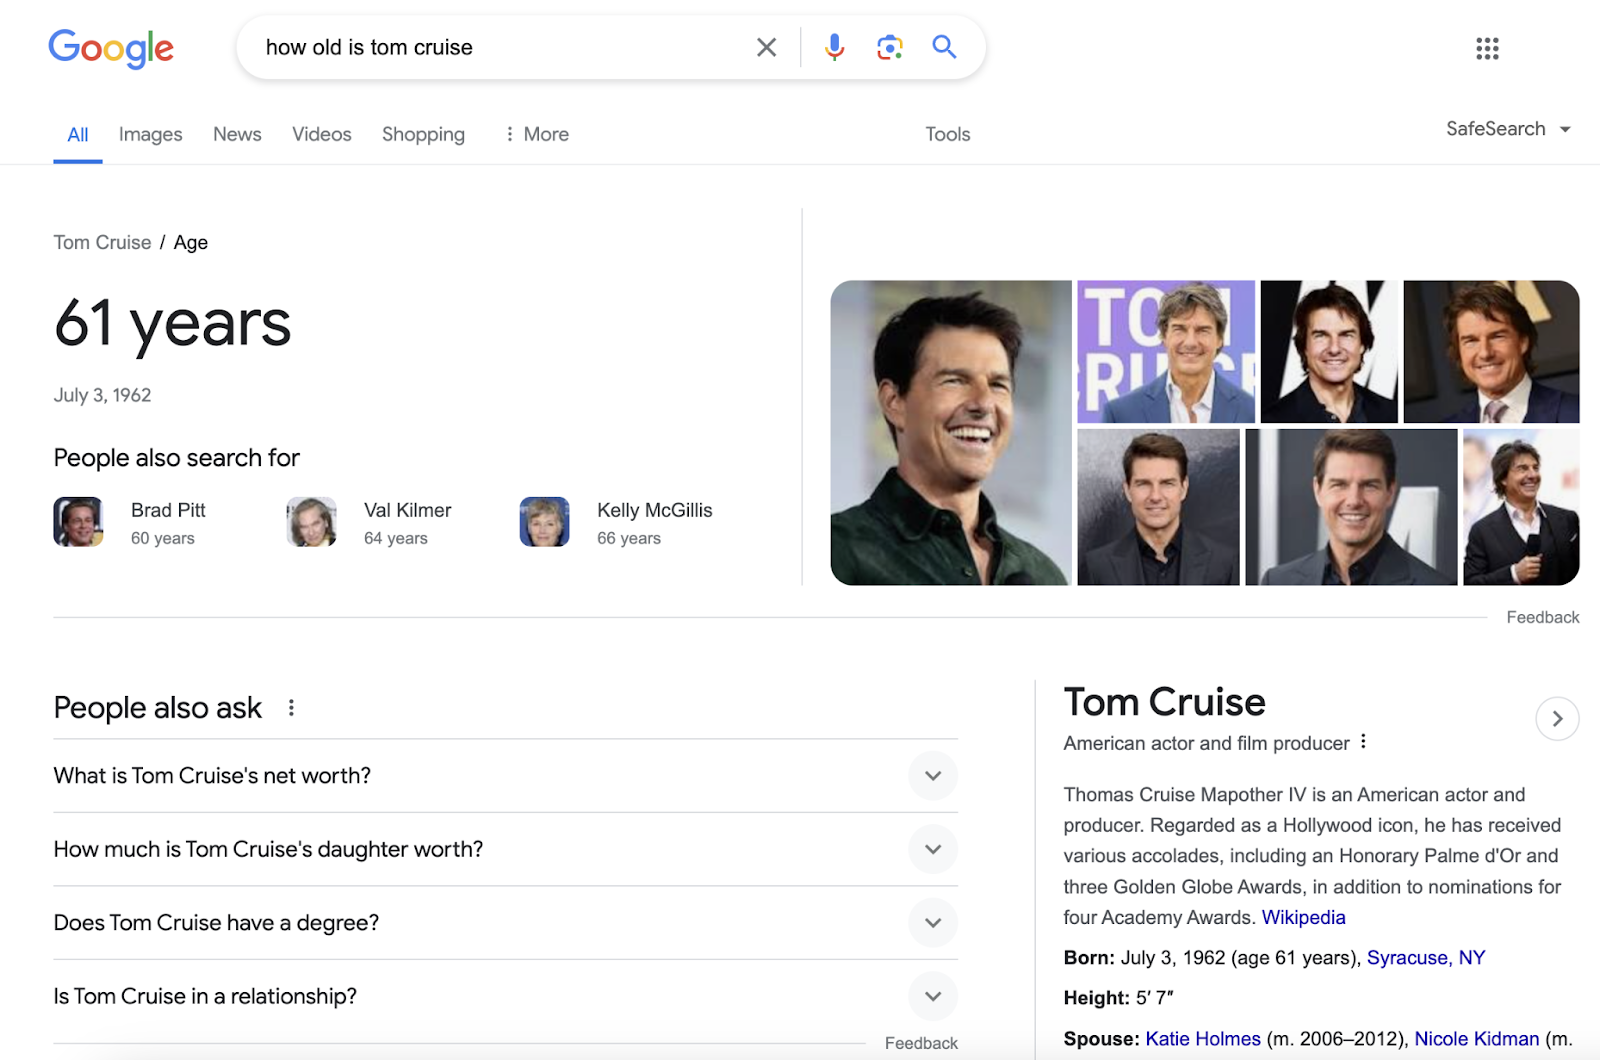 top of the serp shows tom cruise's age as 61 years old in big bold lettering